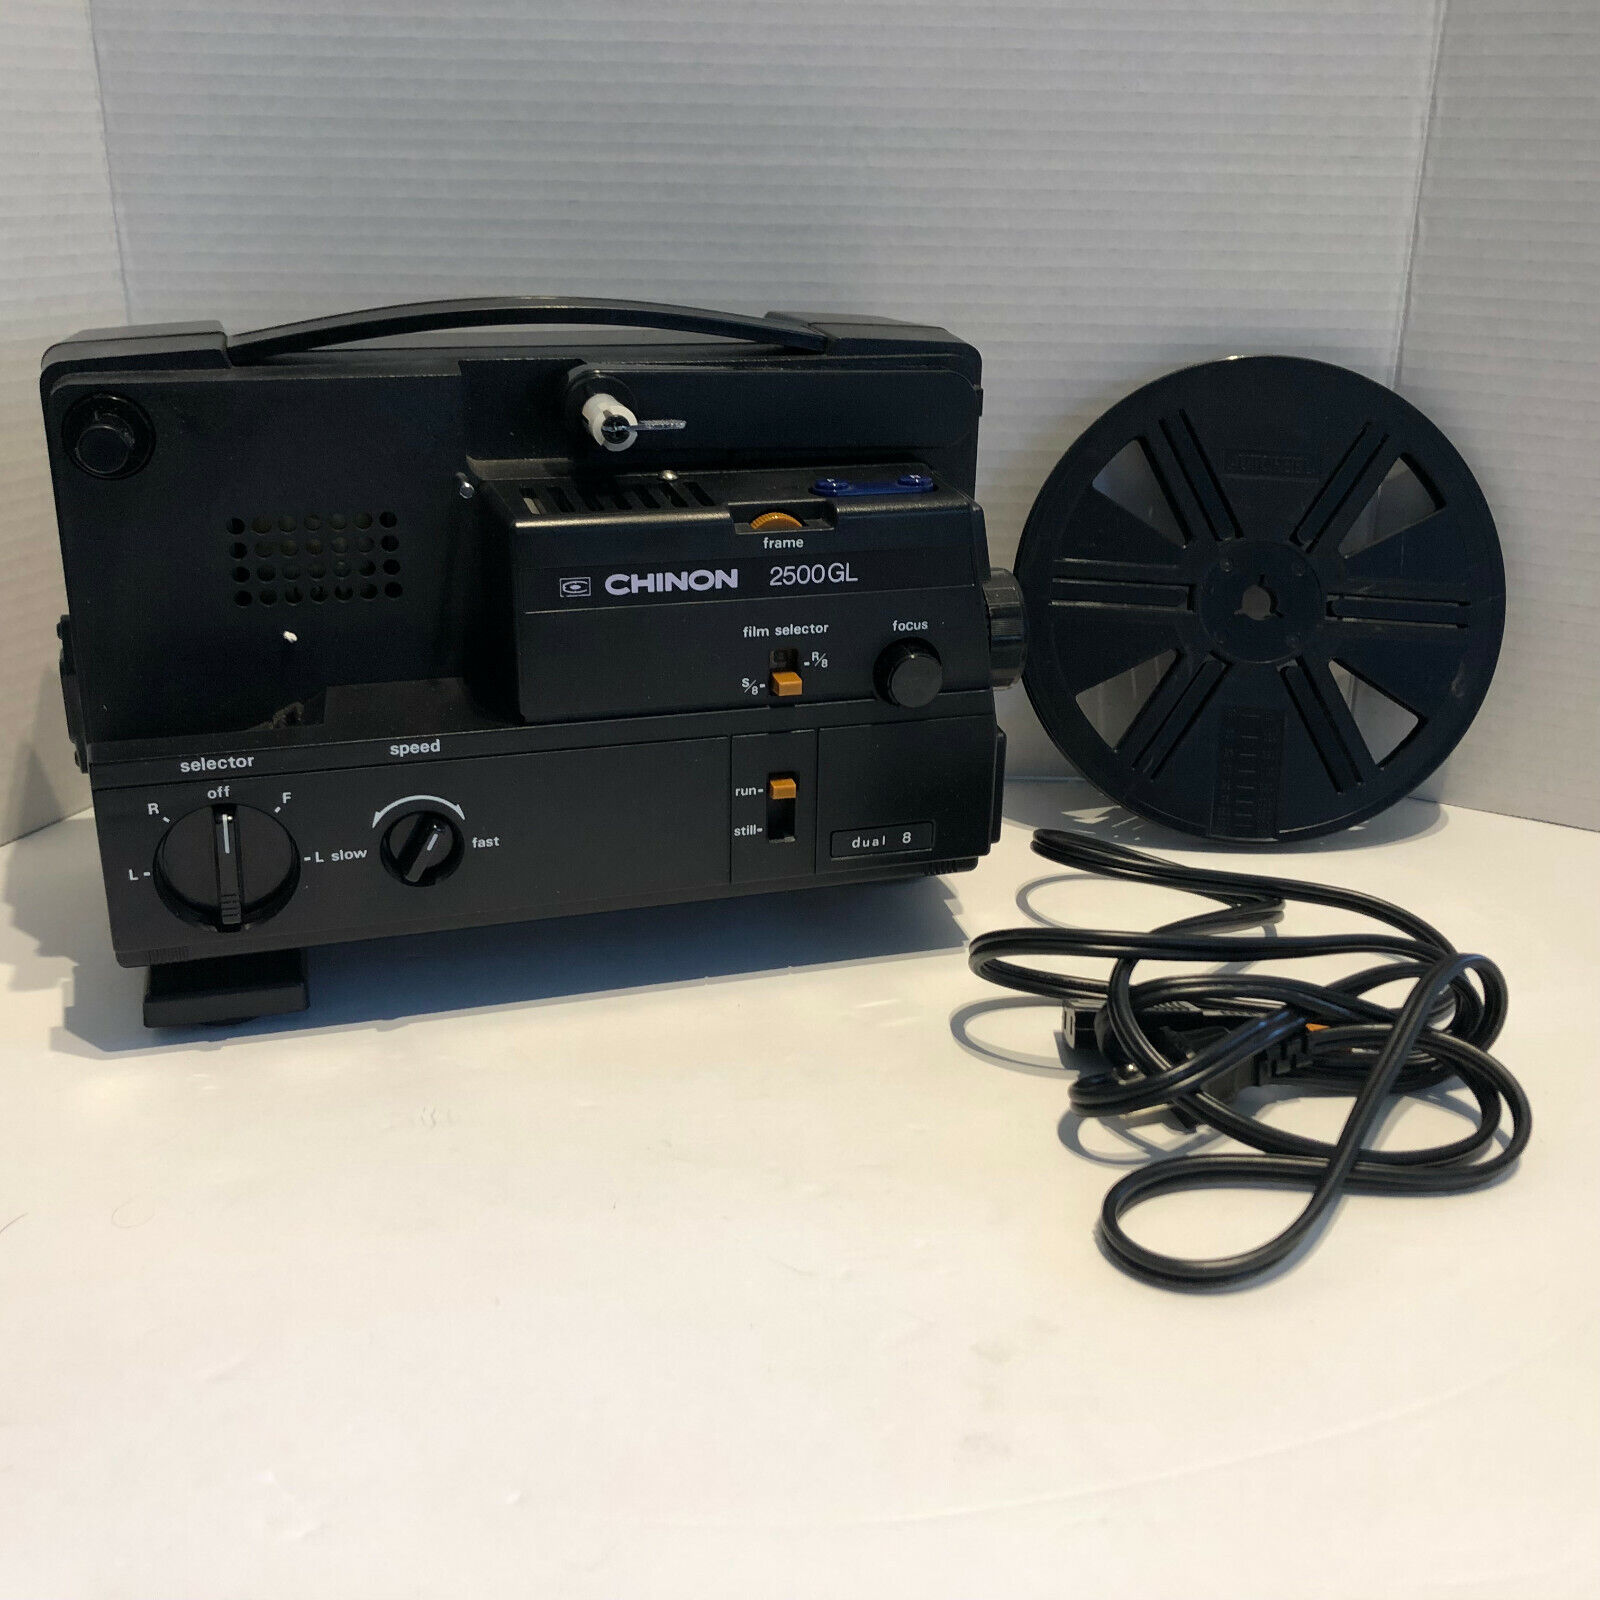 Vintage Chinon 2500GL Dual 8mm & Super 8mm Film Movie Projector - Tested Works